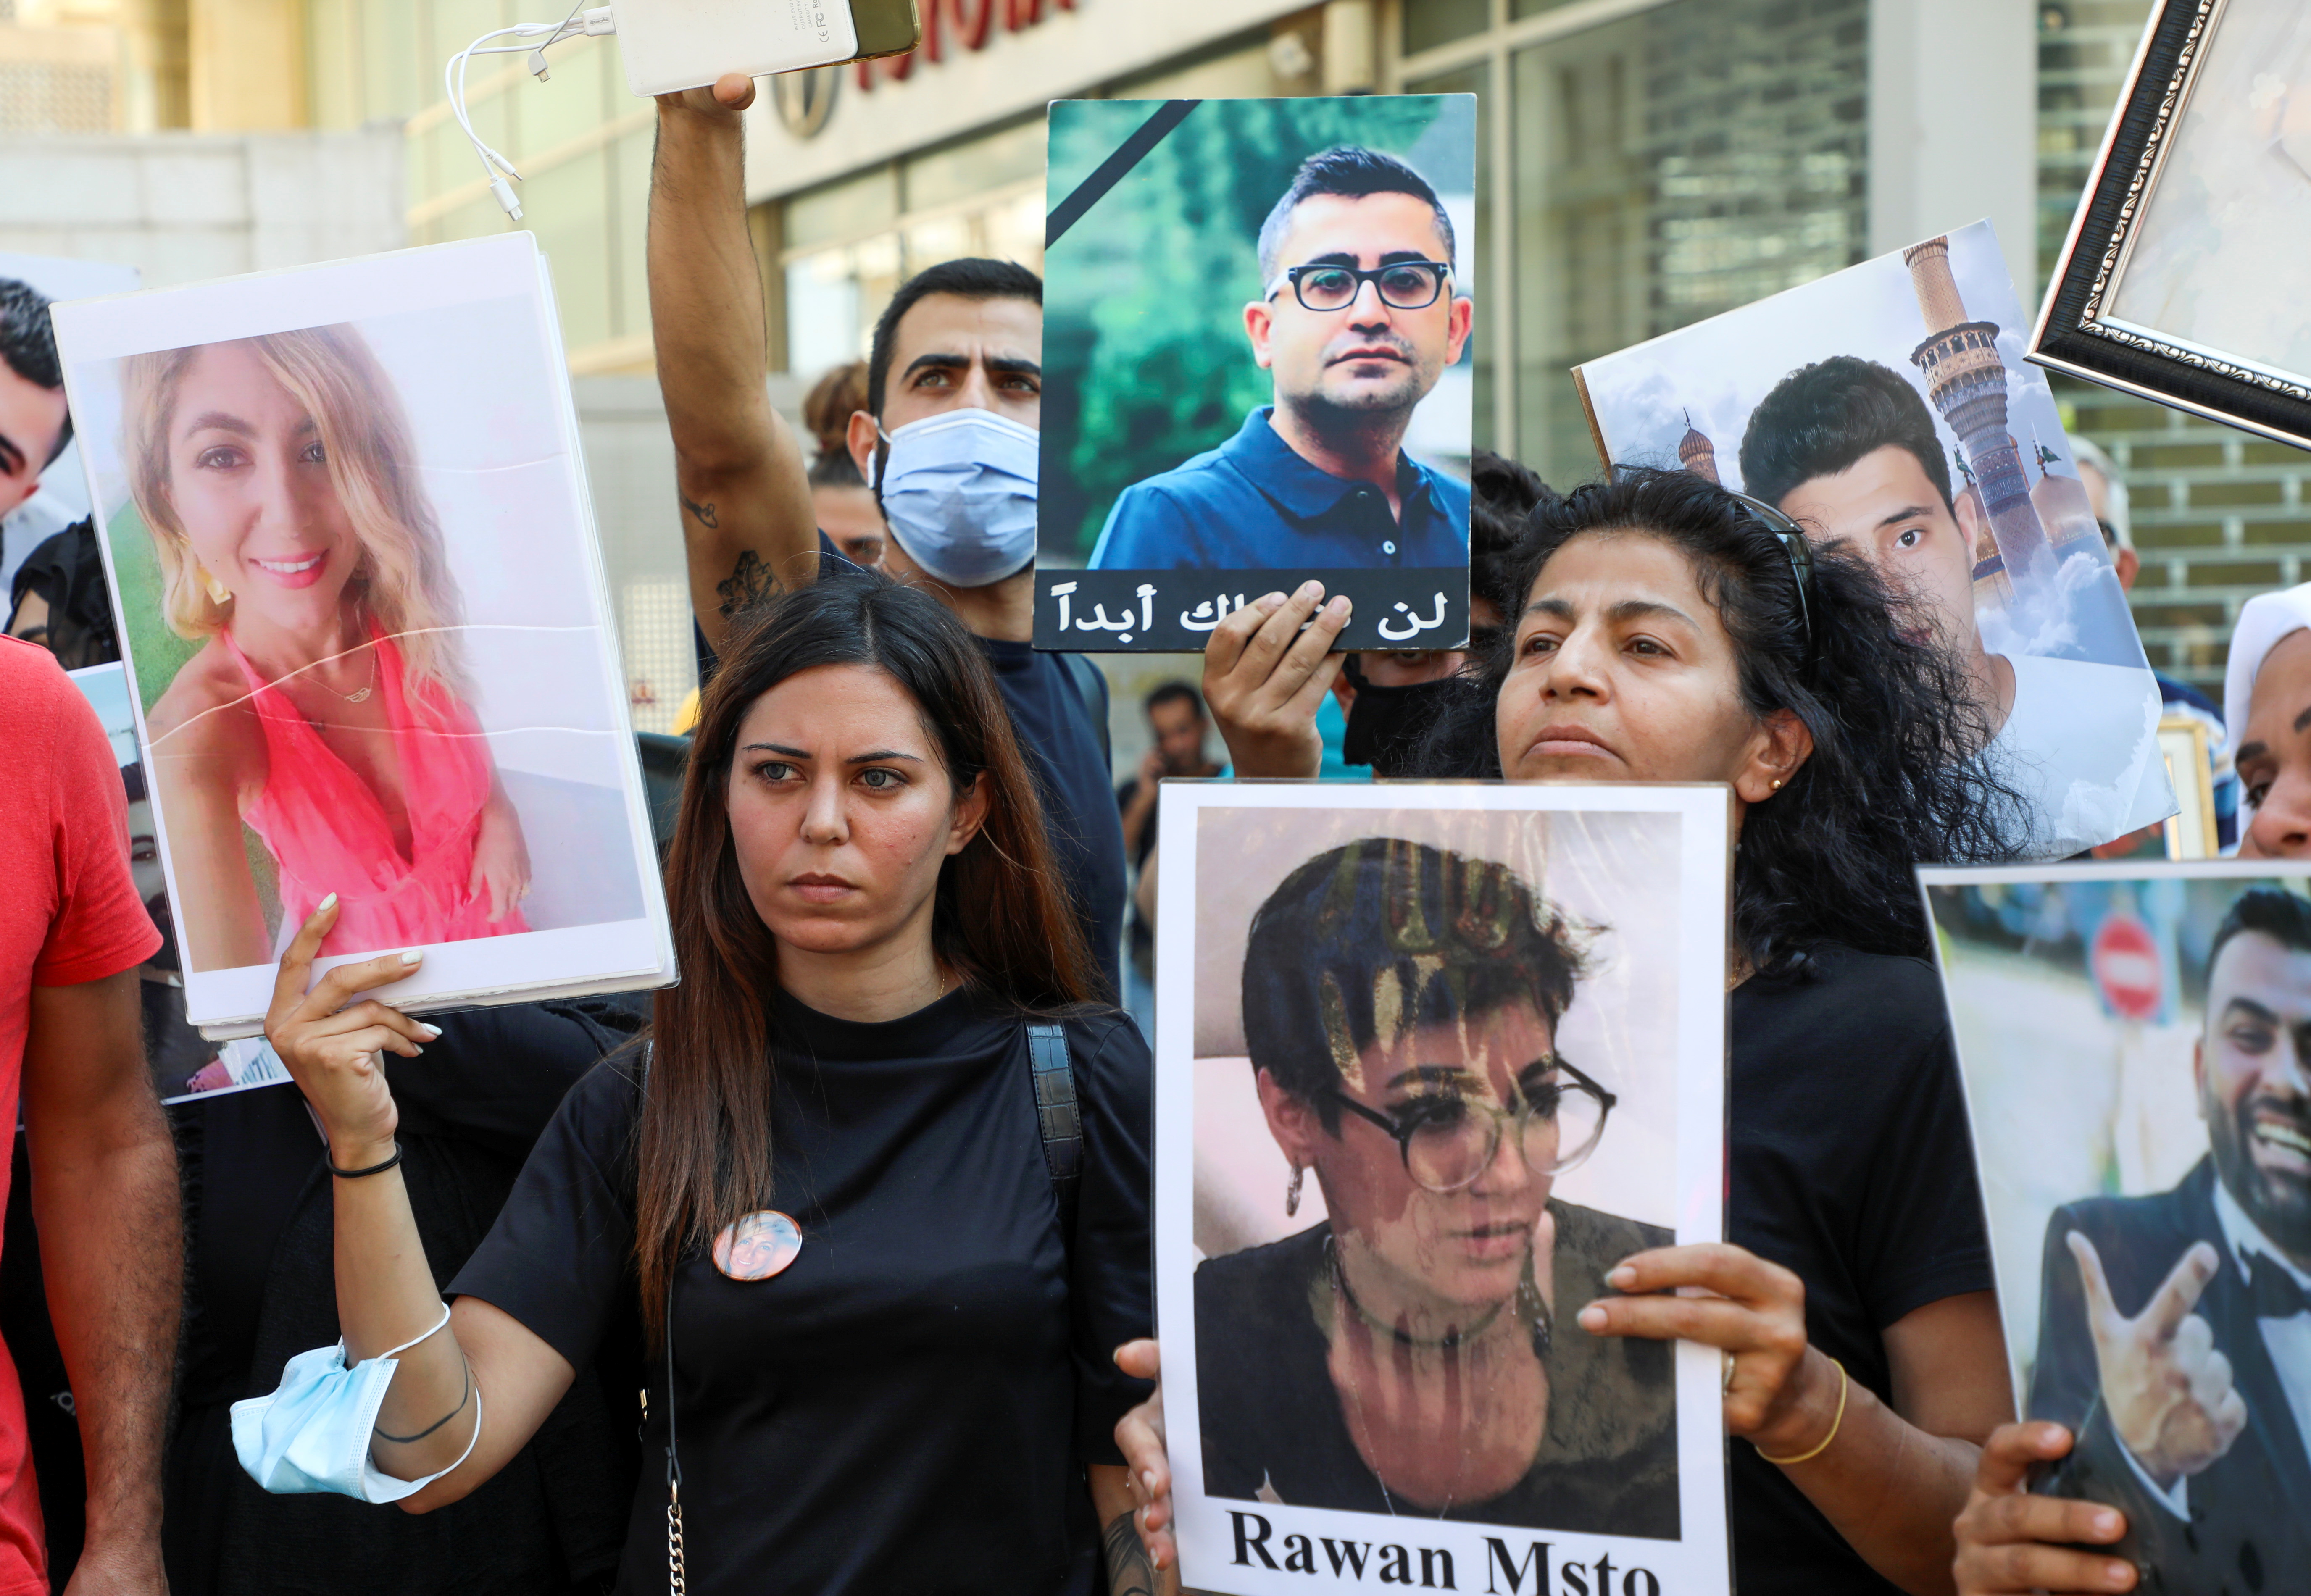 Family members of some of the victims of the August 4 explosion at Beirut port, carry their pictures during a protest demanding justice, in Beirut